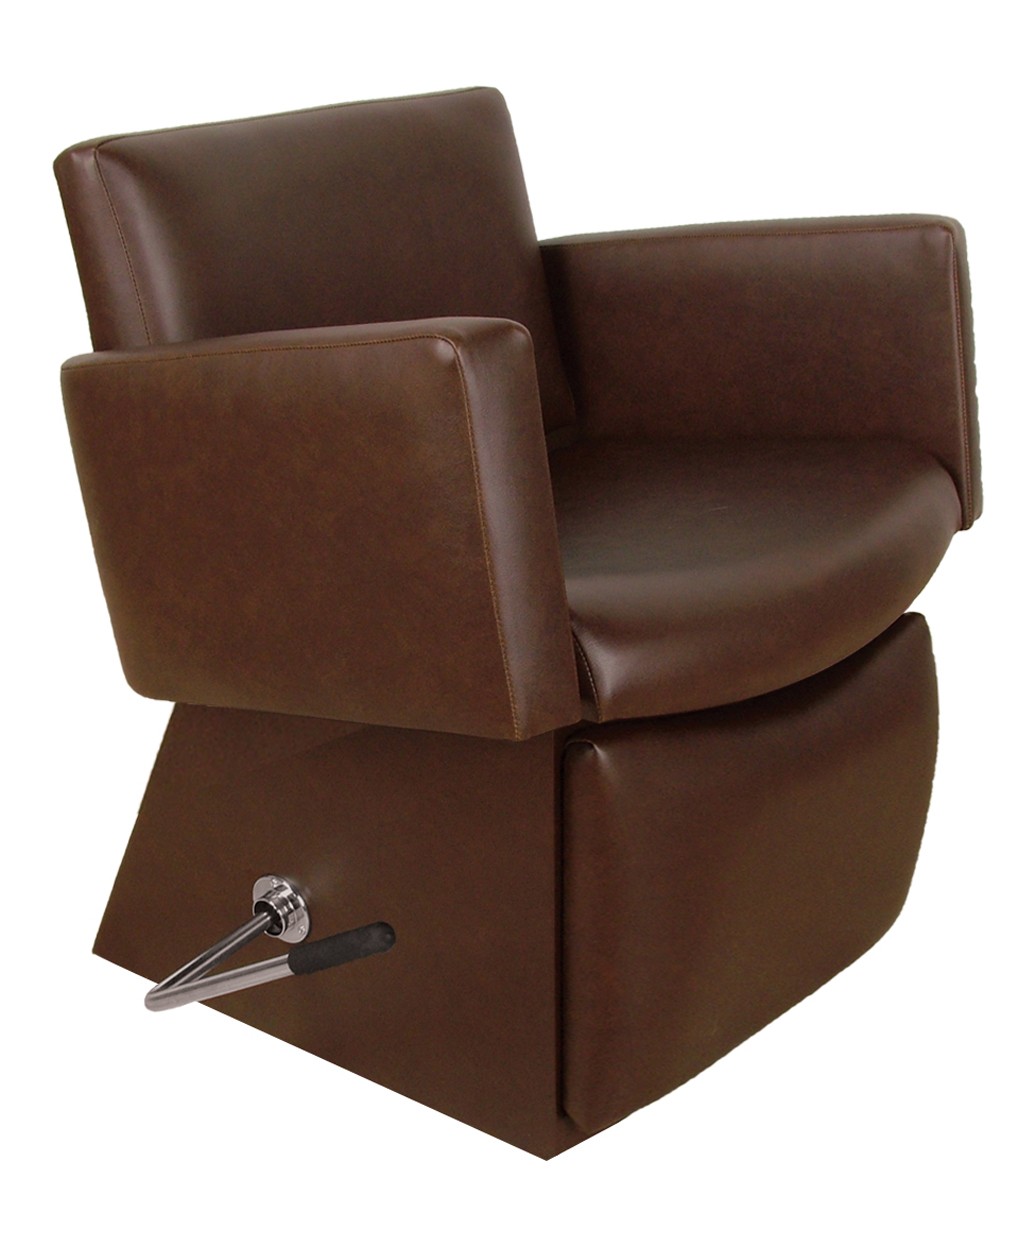 Collins - Cigno Shampoo Chair with Kickout Legrest